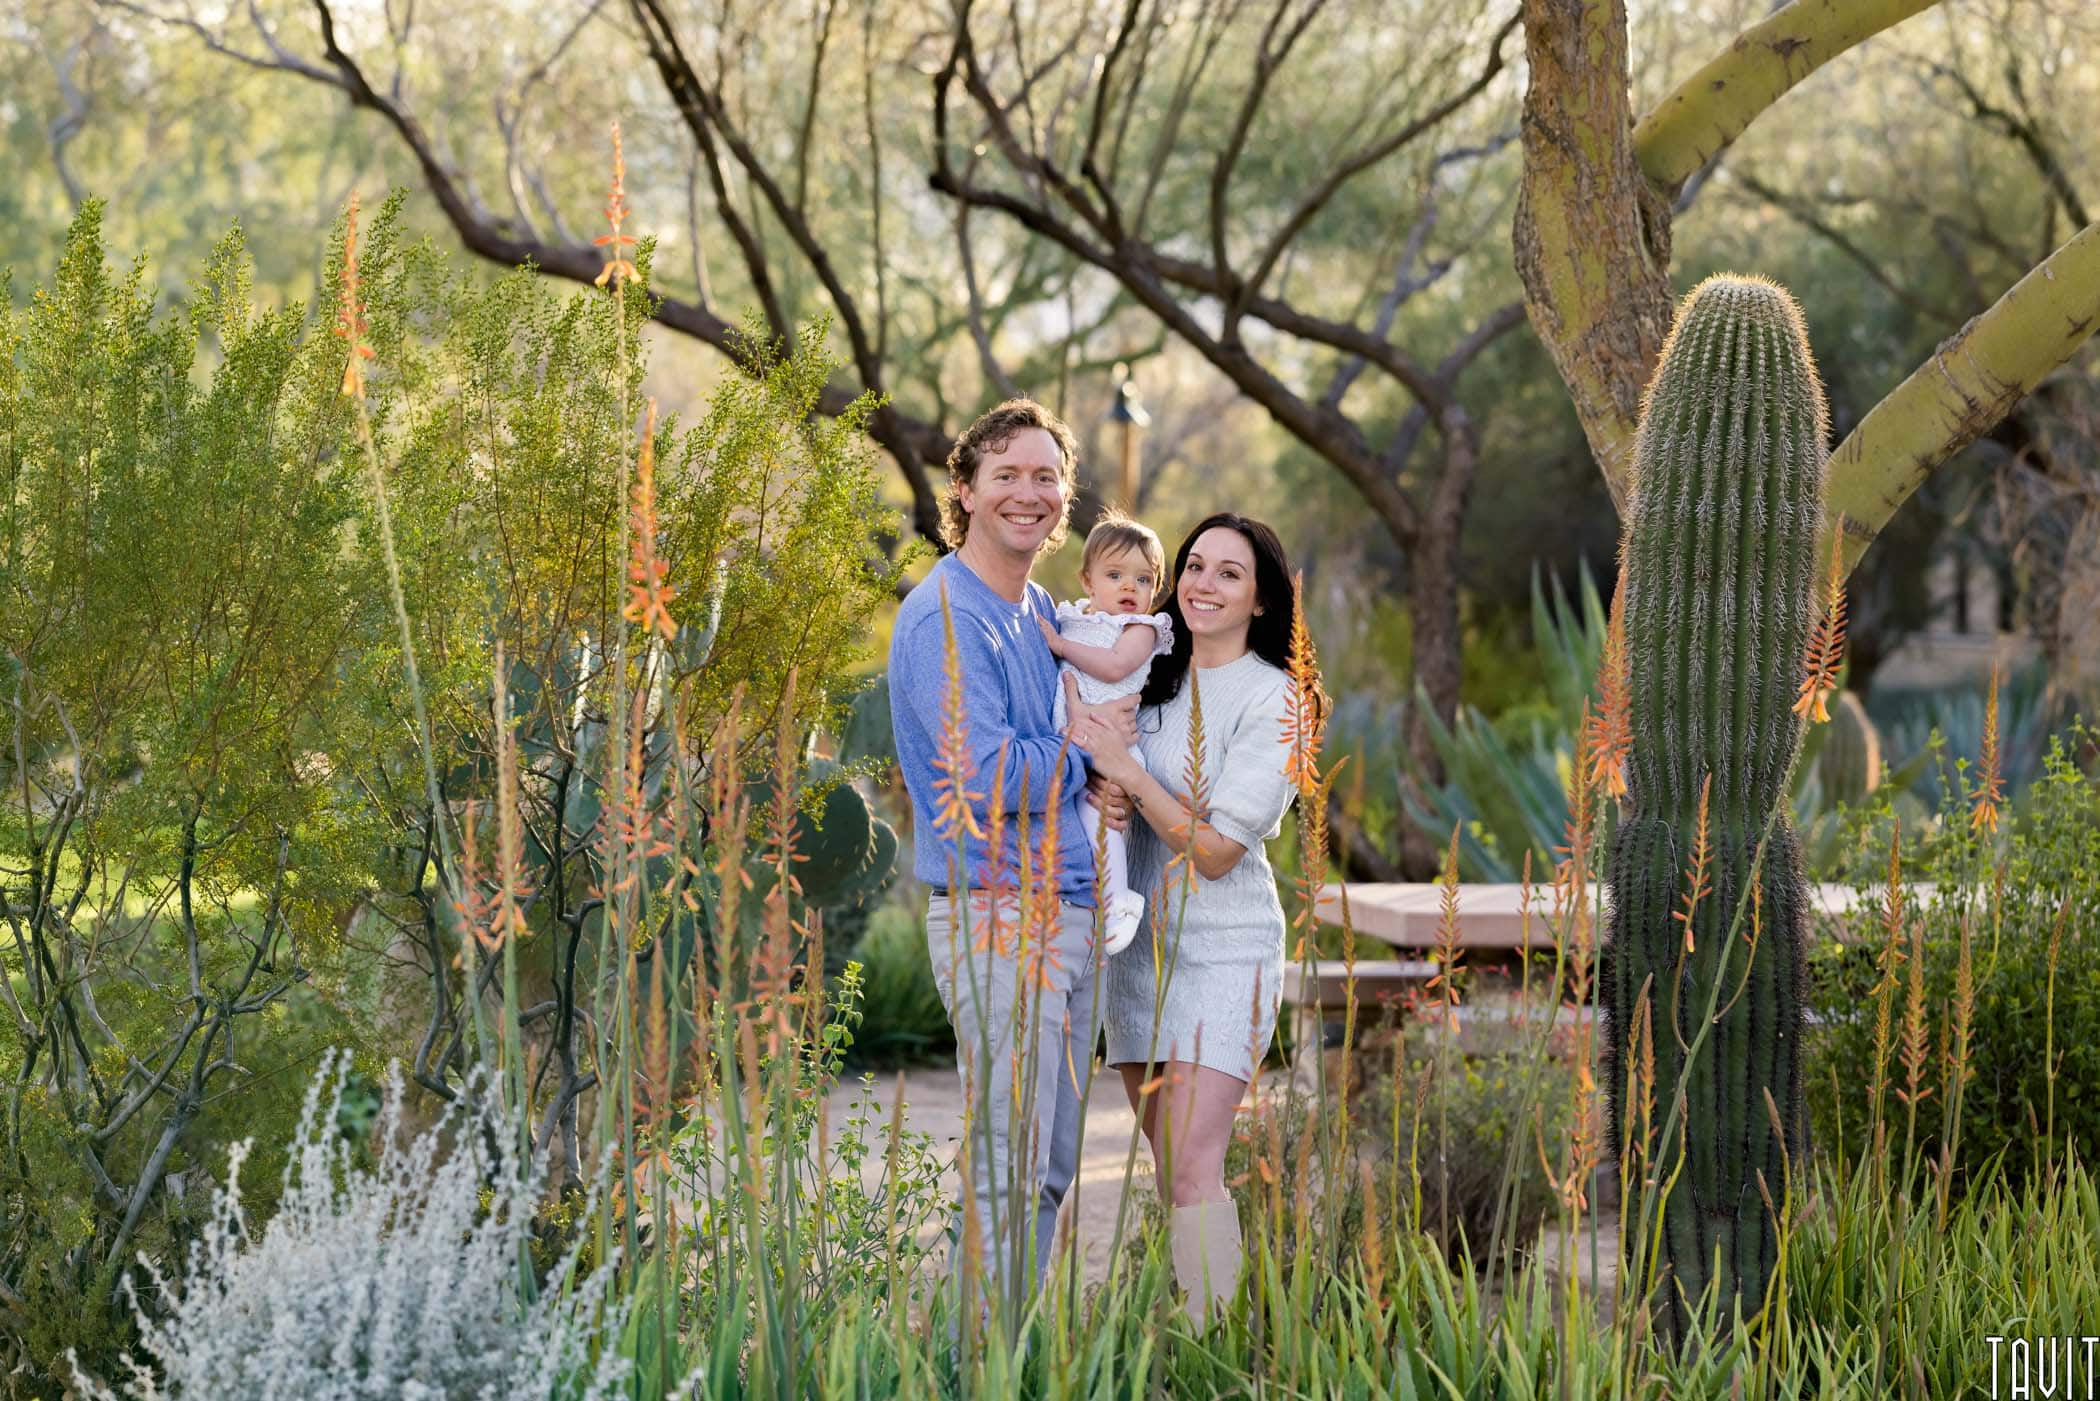 Couple smiling while holding baby near desert plants